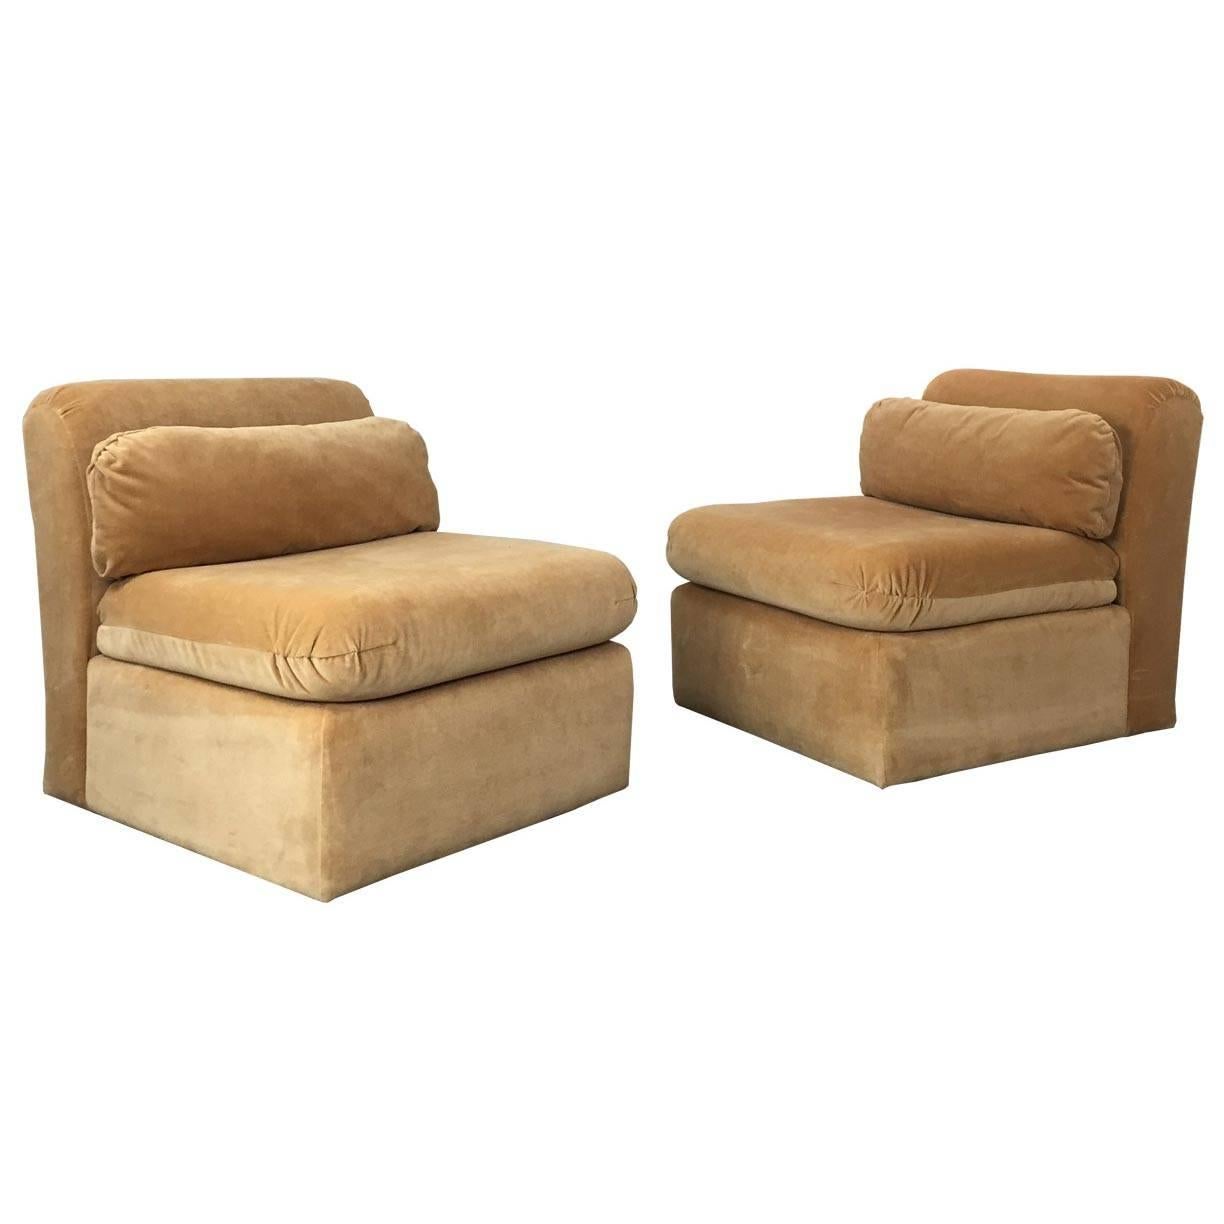 Pair of 1970s Cube Slipper Chairs